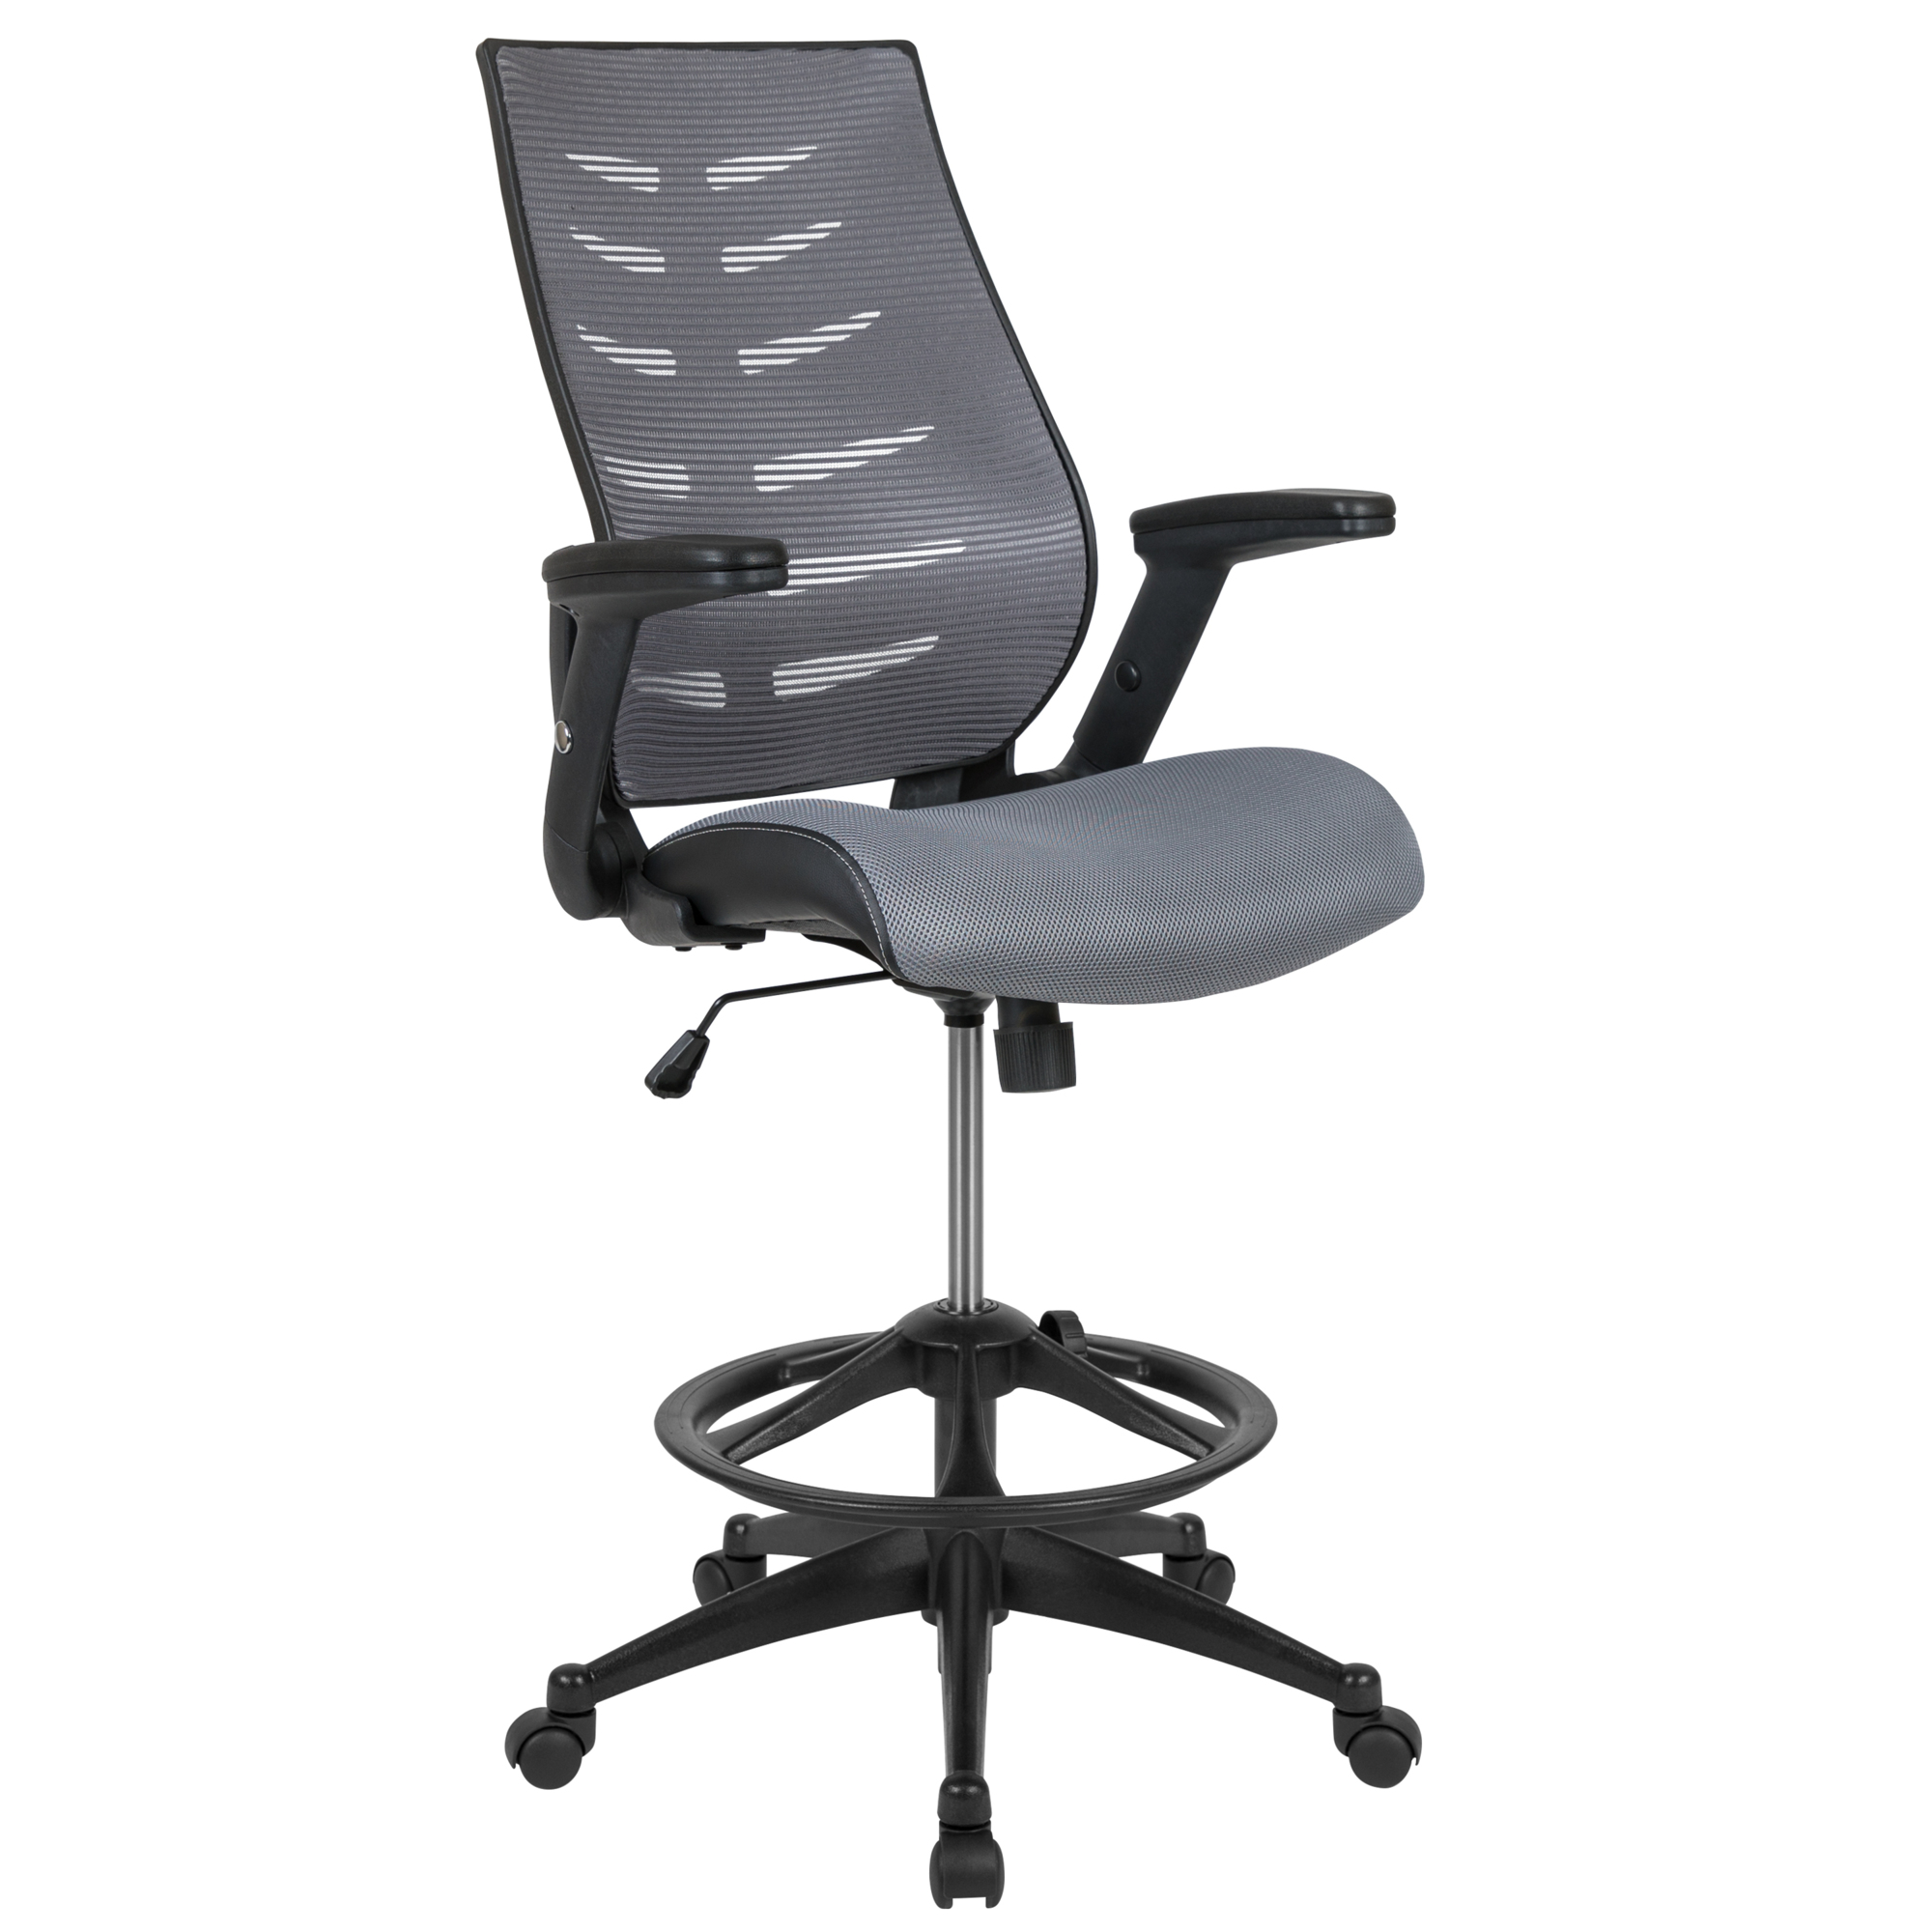 Flash Furniture, High Back Dark Gray Mesh Ergonomic Drafting Chair, Primary Color Gray, Included (qty.) 1, Model BLZP809DDKGY